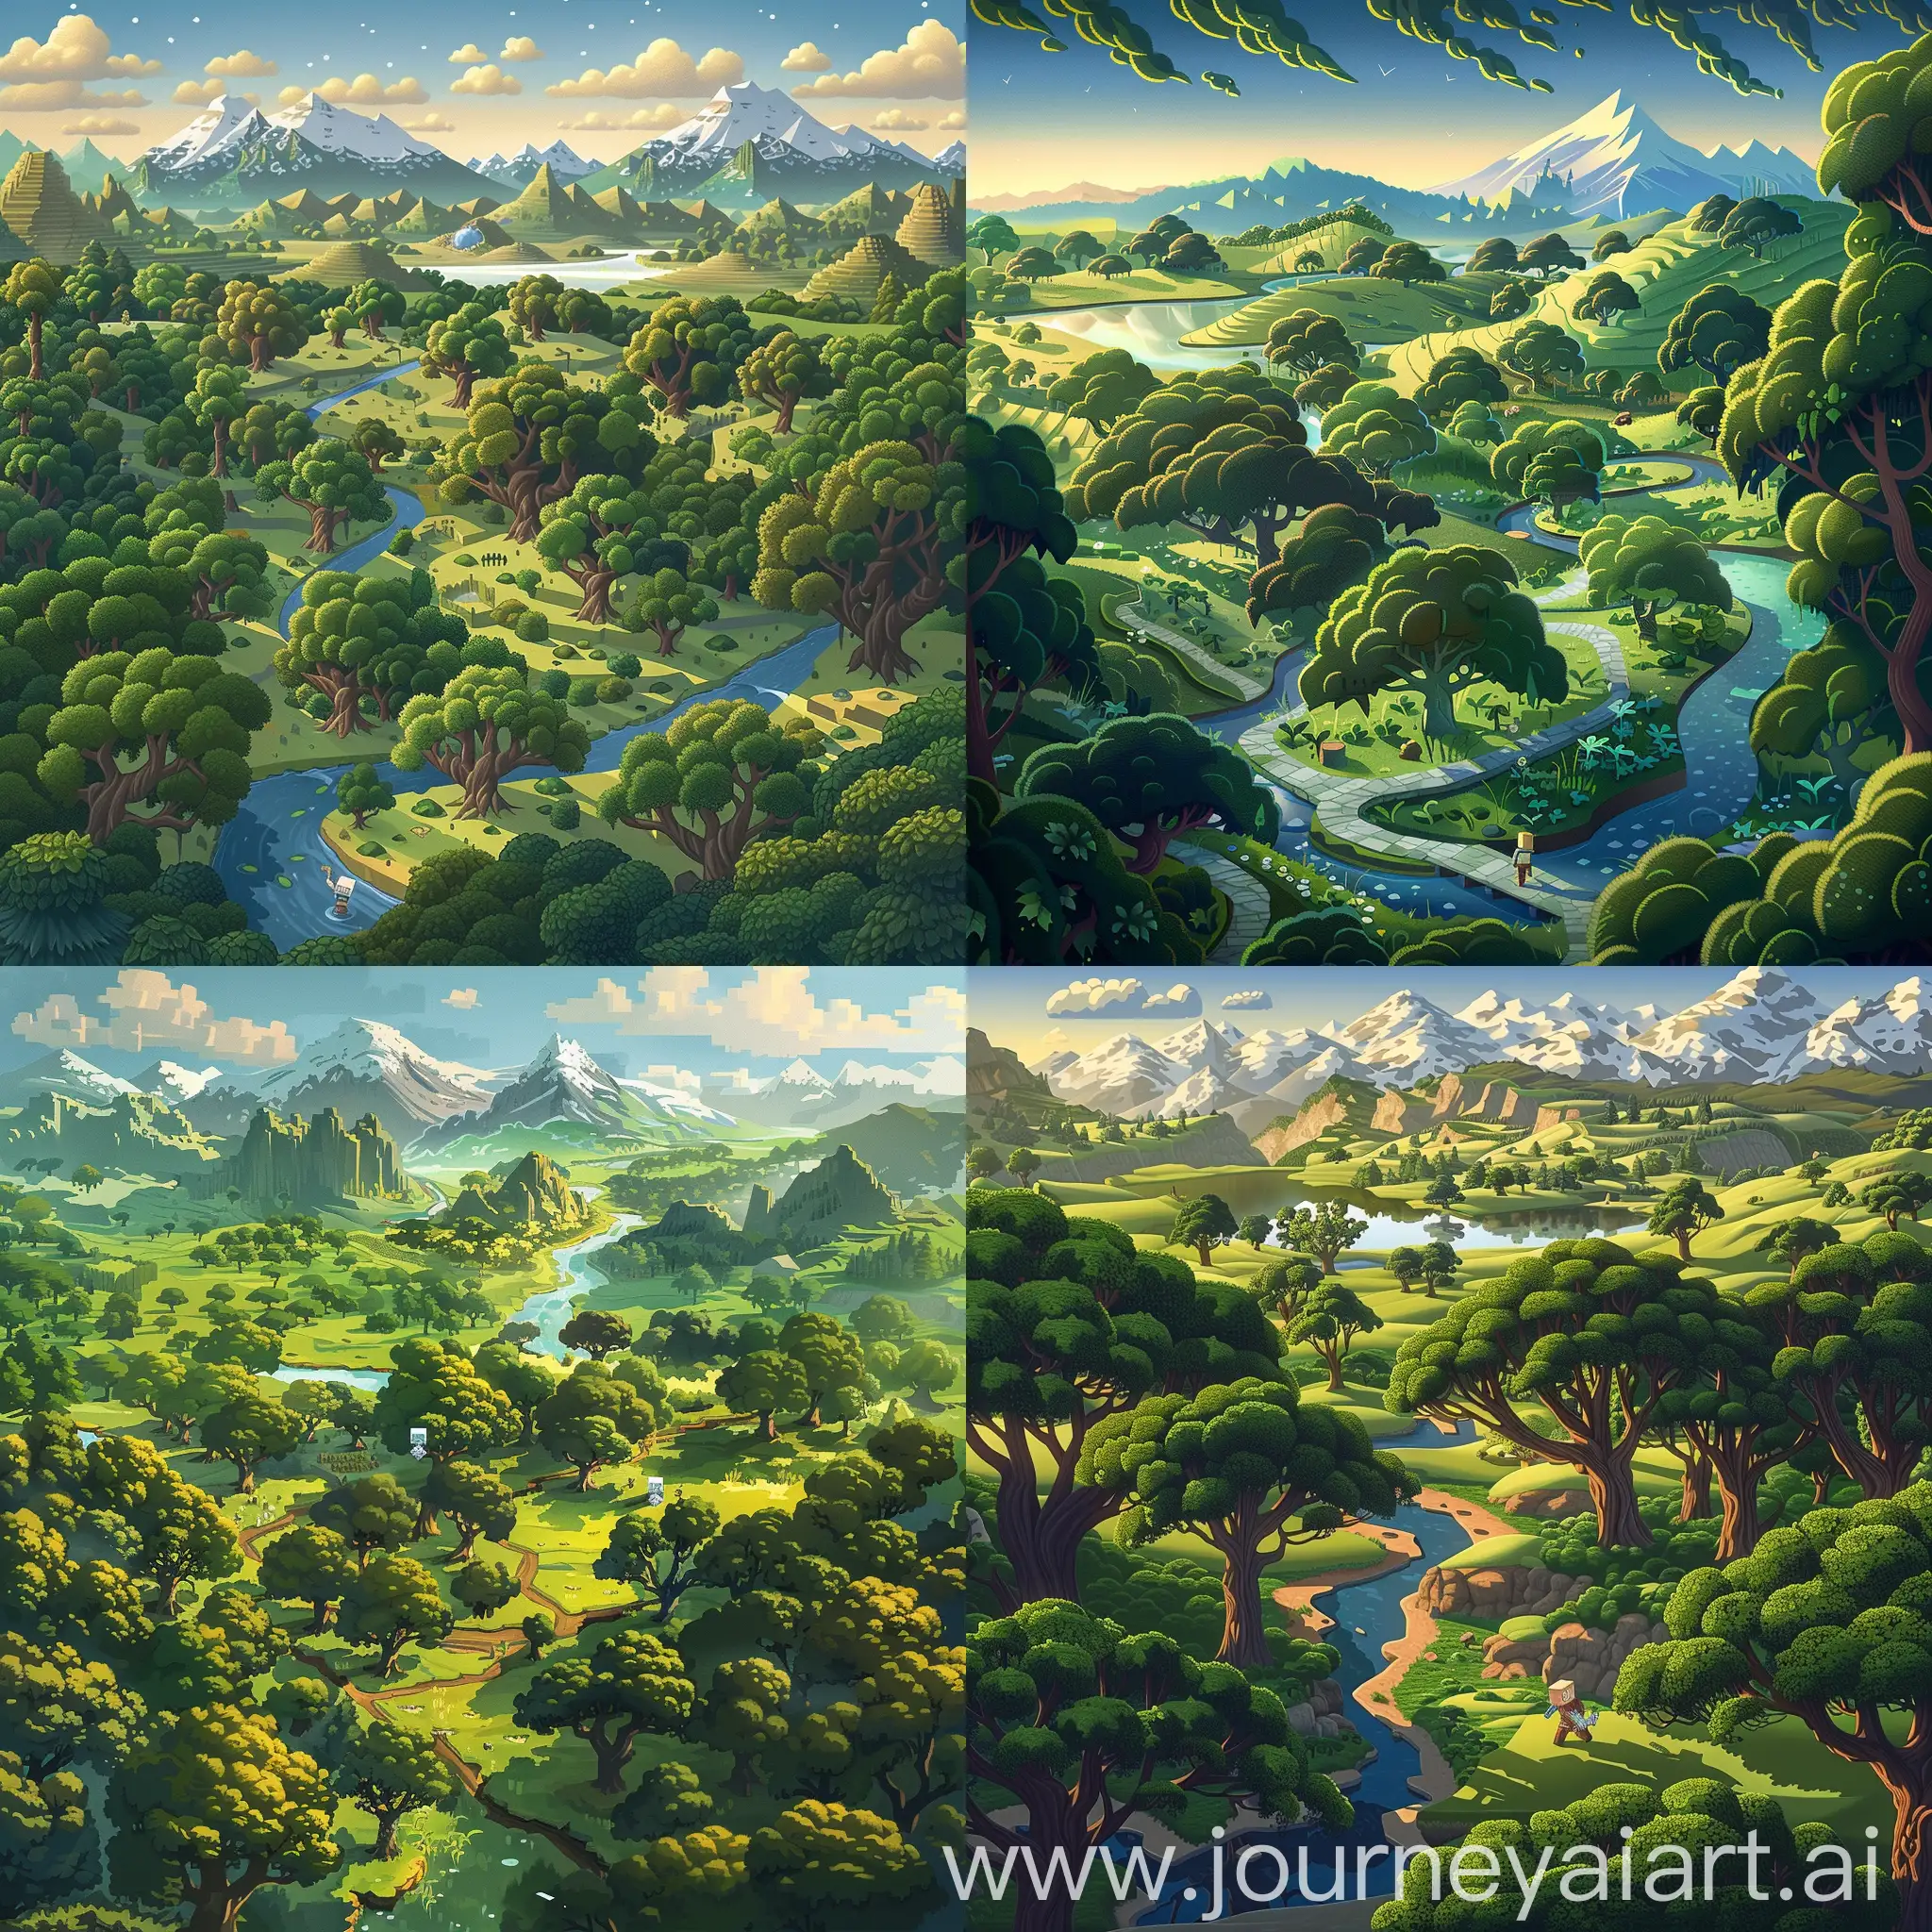 An intricate illustration depicting a Minecraft landscape at dawn, showcasing lush green hills, winding rivers, and towering mountains in the distance. In the foreground, a lone adventurer equipped with a diamond pickaxe navigates through a dense forest, surrounded by towering oak trees and vibrant foliage. The soft morning light filters through the canopy, casting dappled shadows on the forest floor. The adventurer's determined expression reflects their quest for precious diamonds as they carefully survey the landscape for the telltale signs of diamond ore veins. Nearby, a serene lake reflects the azure sky, adding a sense of tranquility to the scene. In the distance, the peaks of snow-capped mountains glisten in the early light, hinting at the potential riches hidden within their depths. The illustration captures the sense of exploration and discovery synonymous with the search for diamonds in the vast and varied world of Minecraft. 